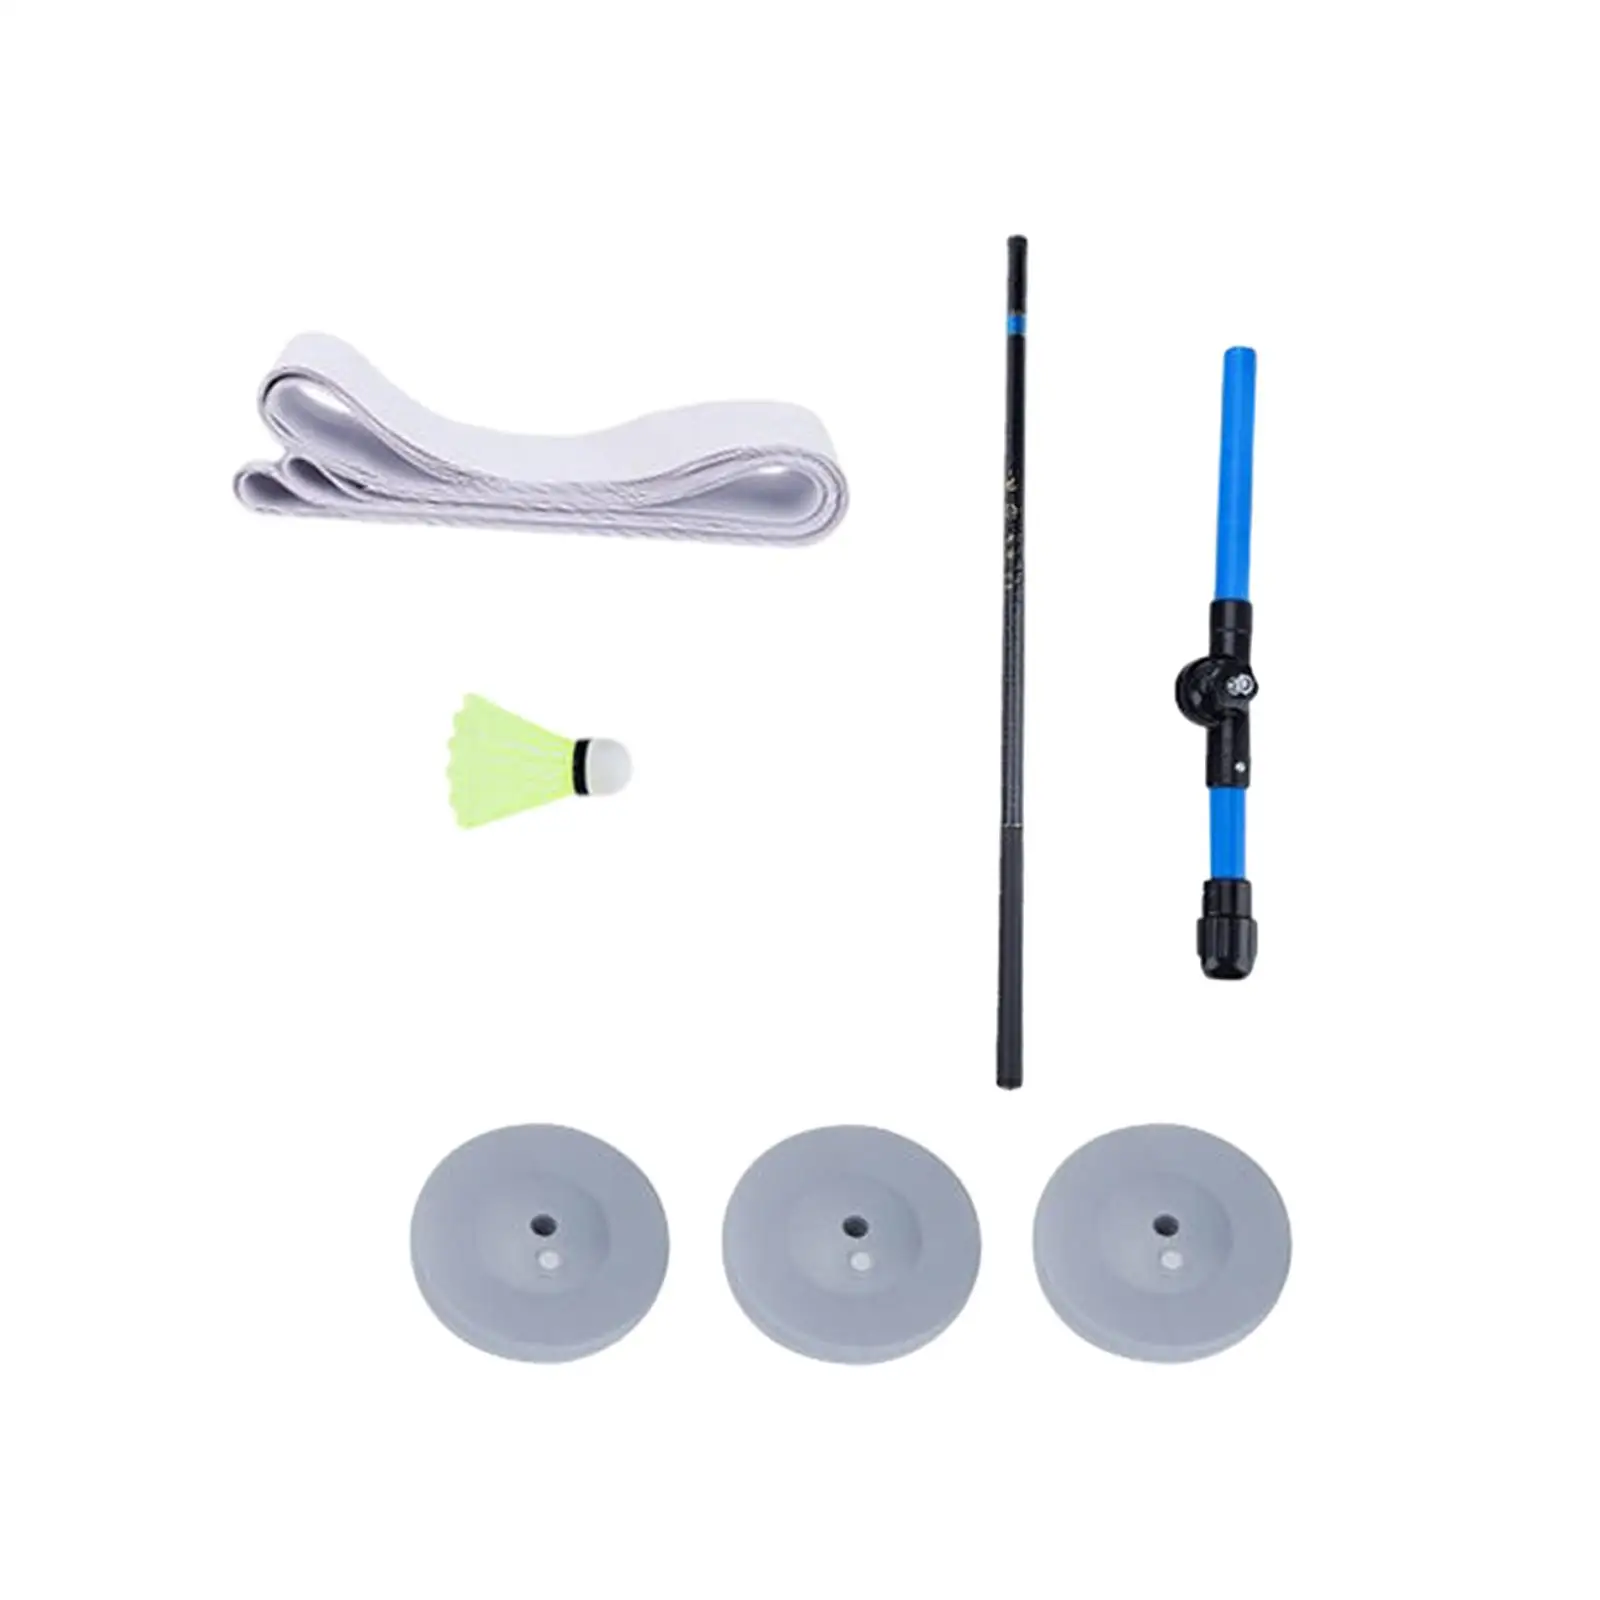 Badminton Trainer Portable Self Practice Tool for Exercising Indoor Playing